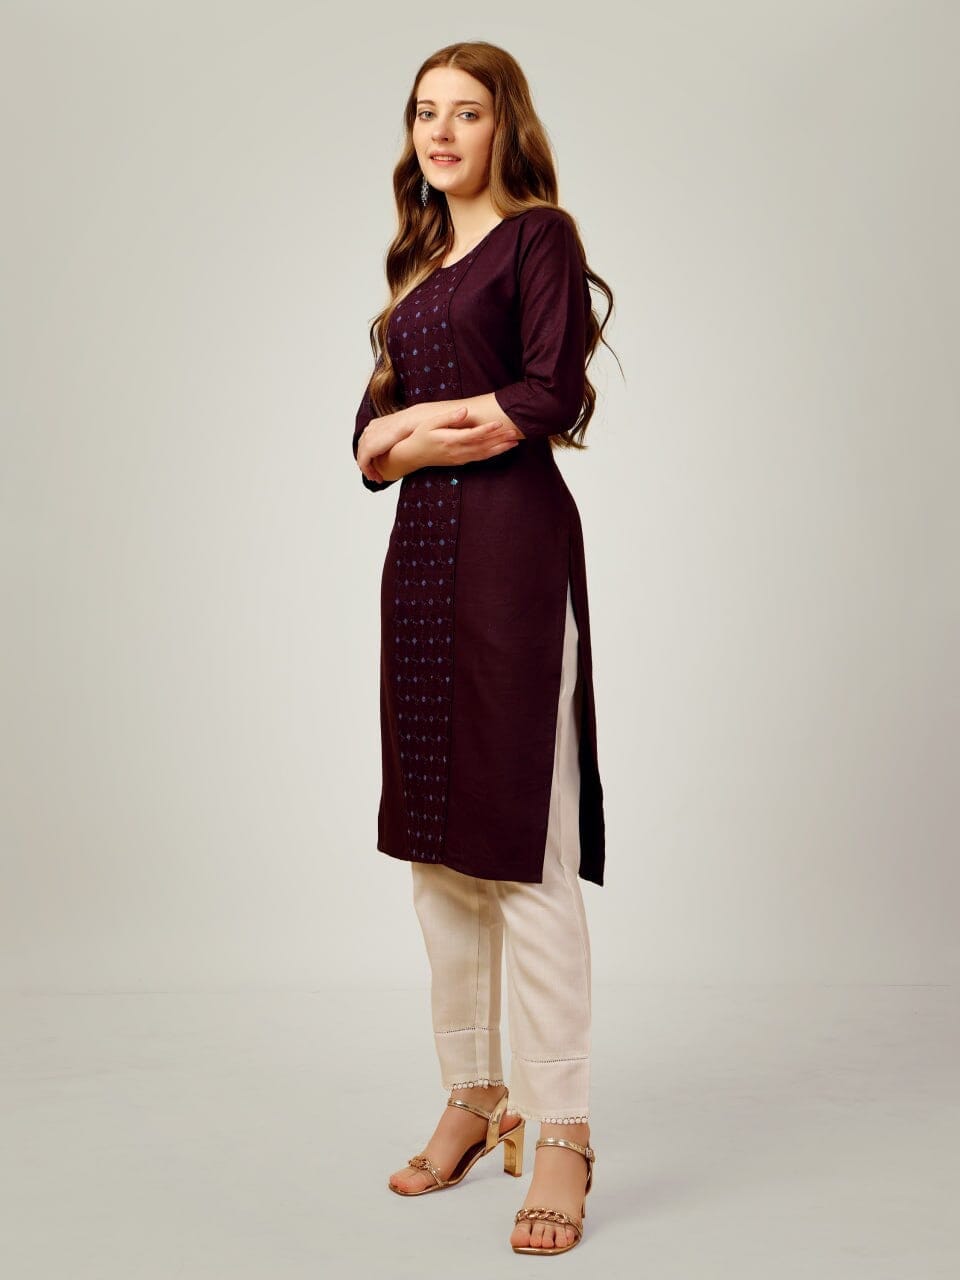 Black Cotton Blend Sequence Embroidered Work Kurti with Pant Kurti with Pant Shopin Di Apparels 